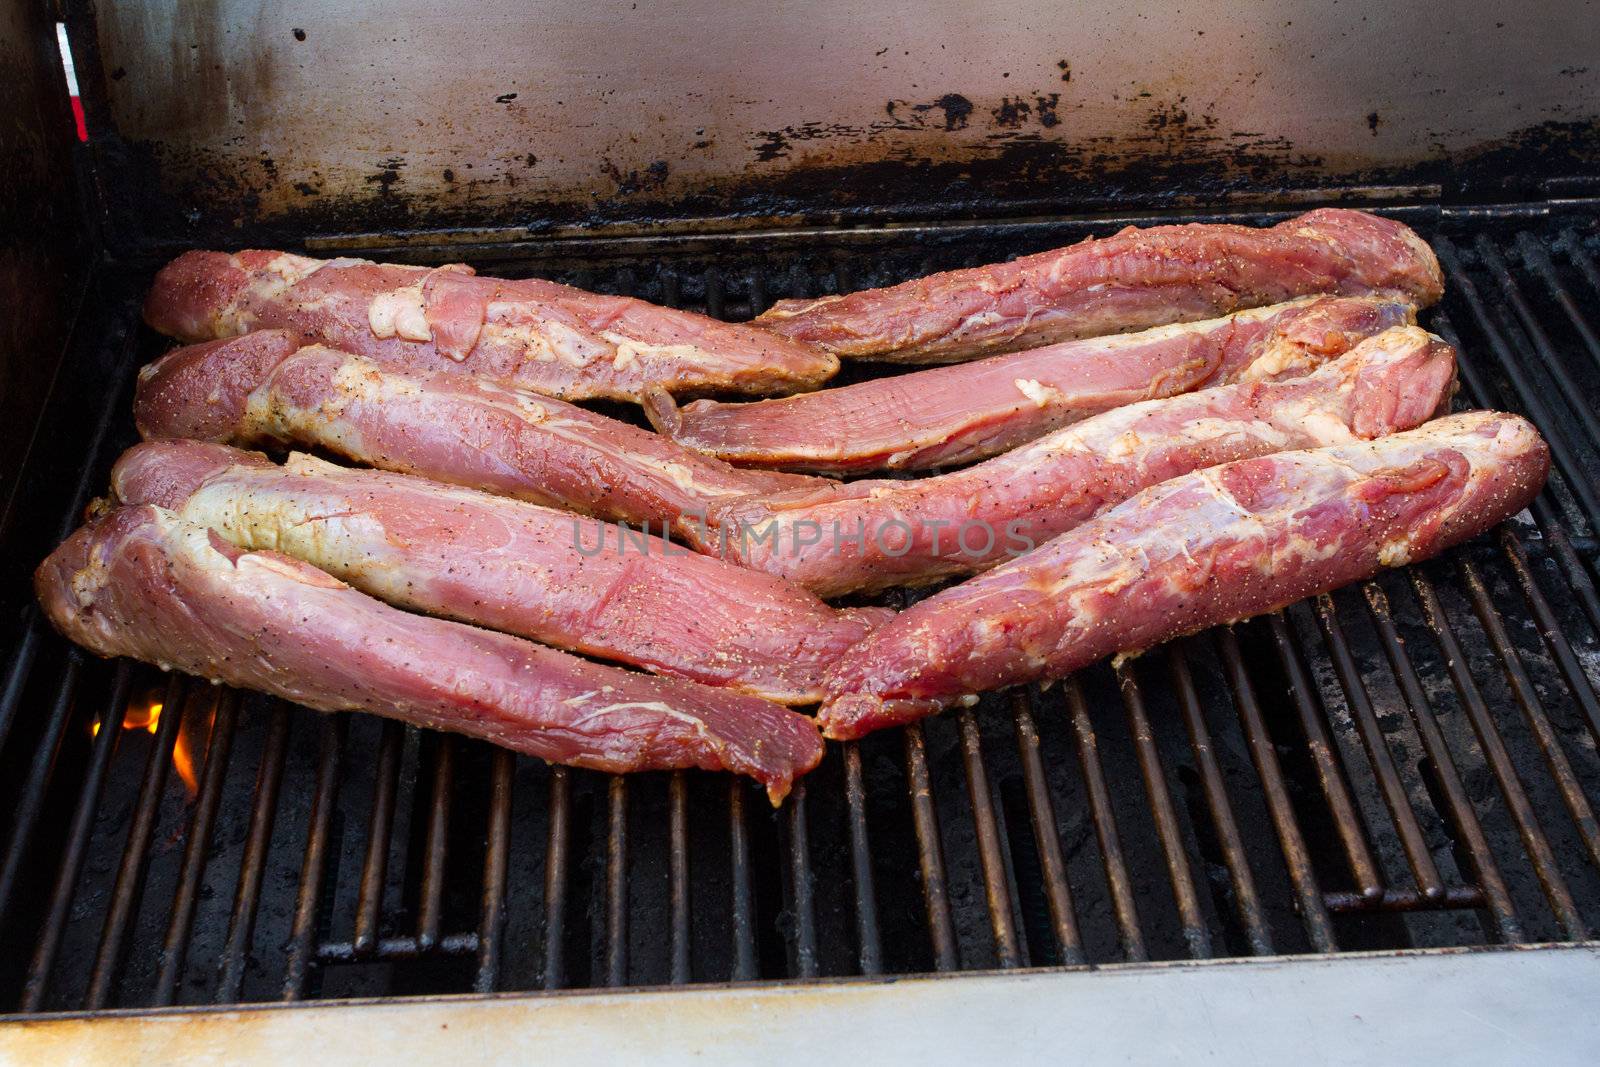 A few slabs of pork are being cooked on a grill barbeque before a wedding.